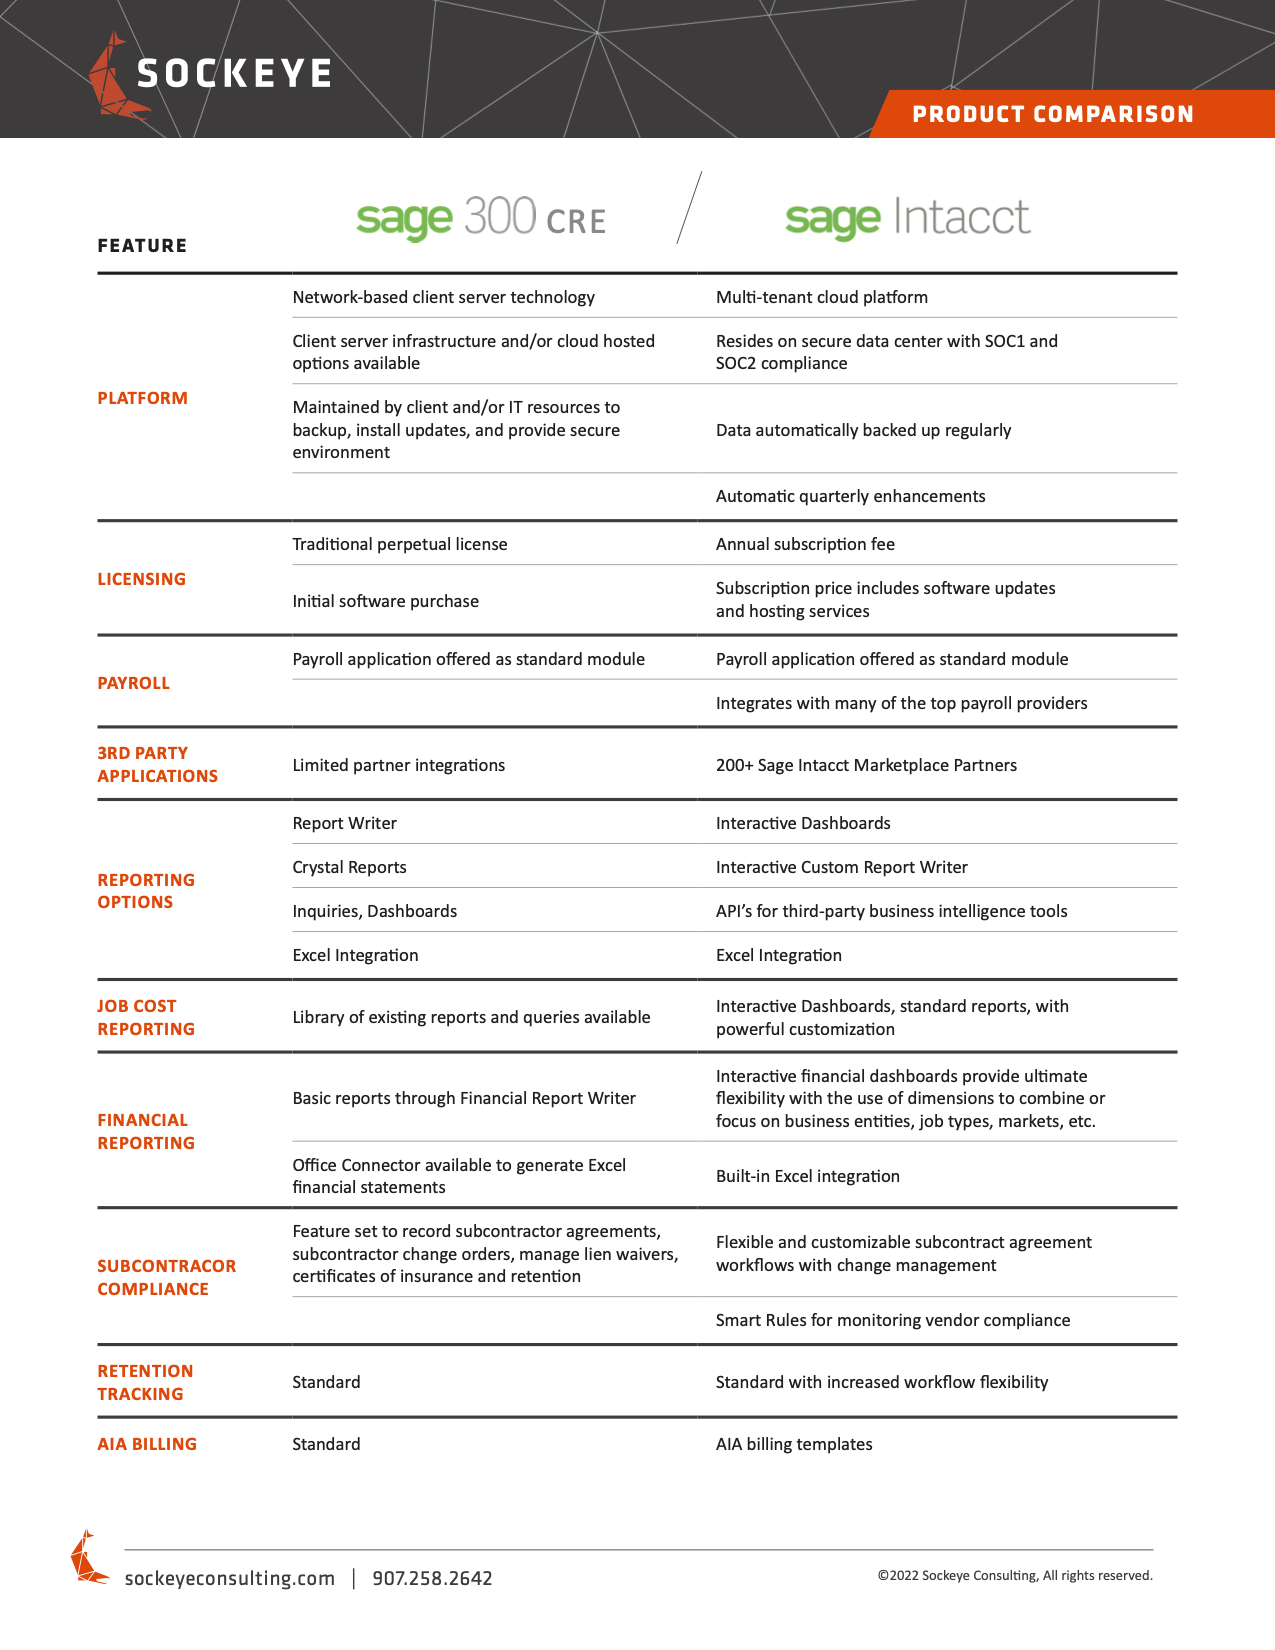 Comparison chart between Sage 300 and Sage Intacct